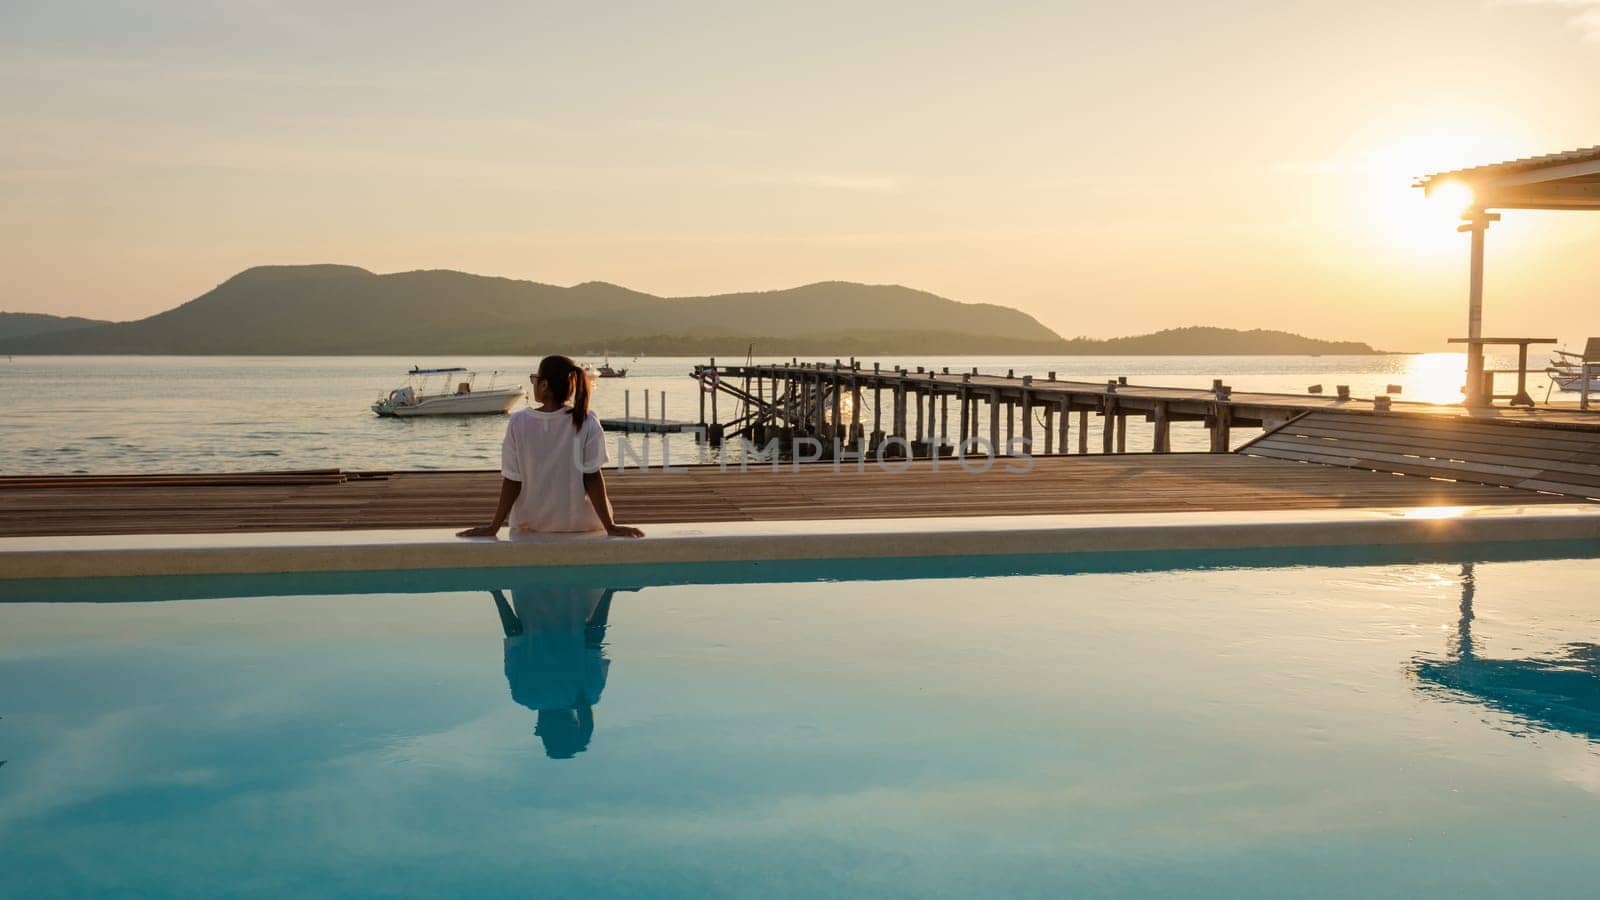 Asian woman watching the sunset at a wooden pier by the swimming pool in the ocean during sunset in Samaesan Thailand